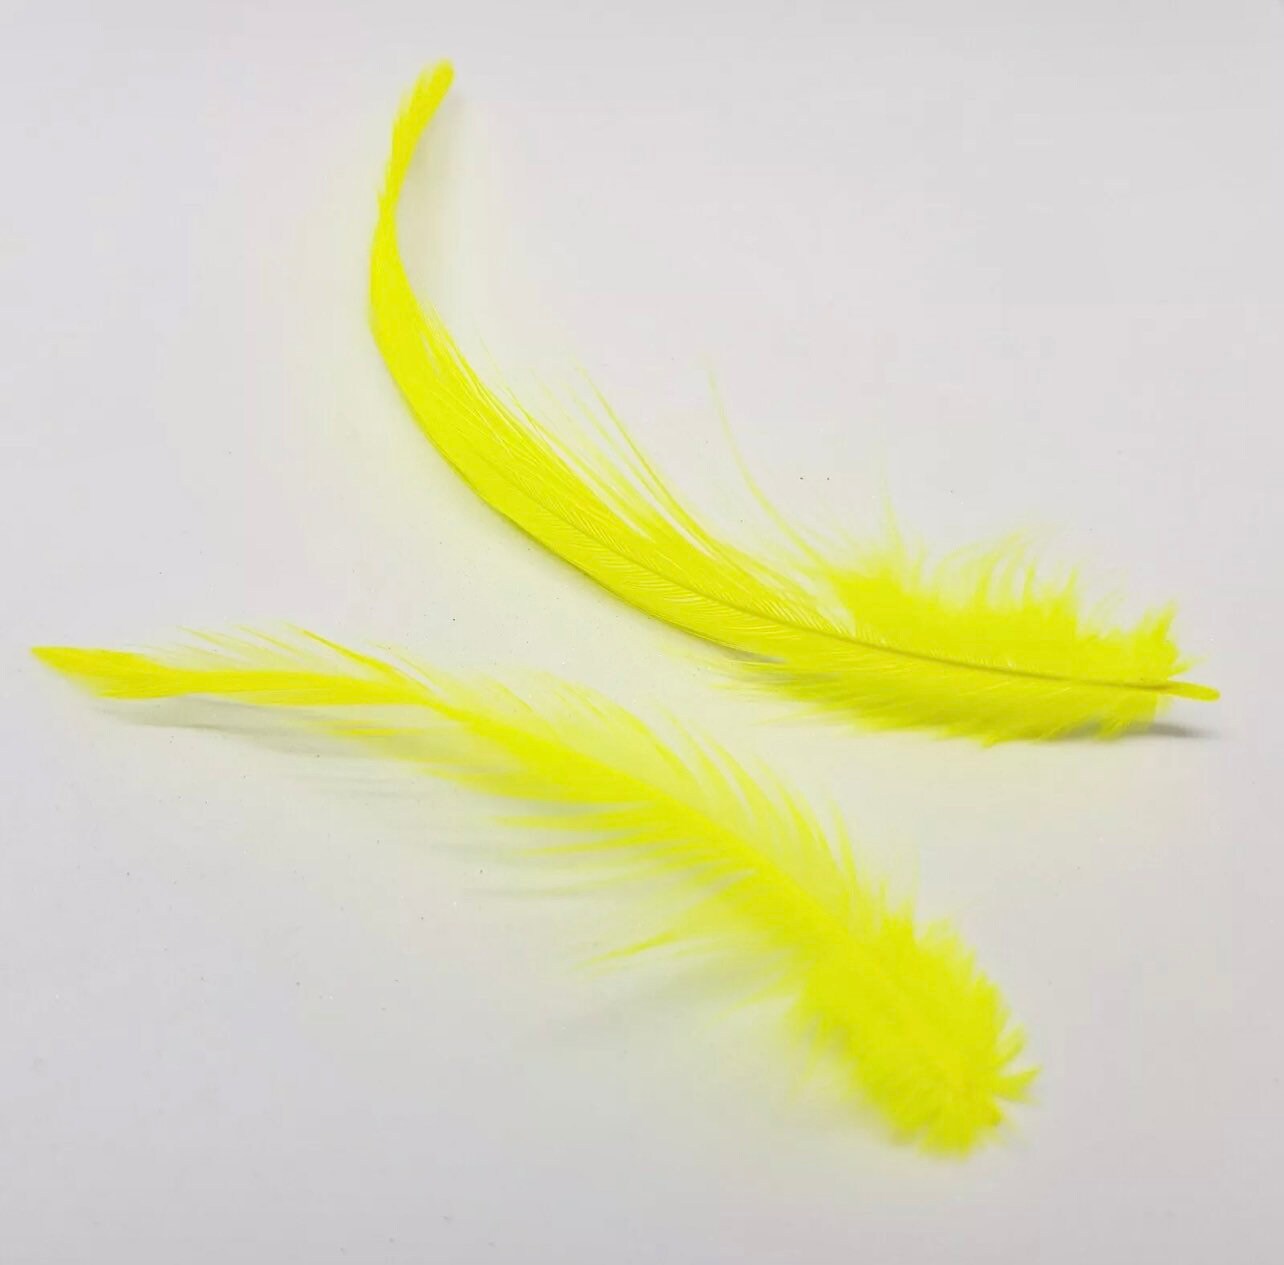 Wordens Vintage Yellow Rooster Tail Fishing Lure Used Offers